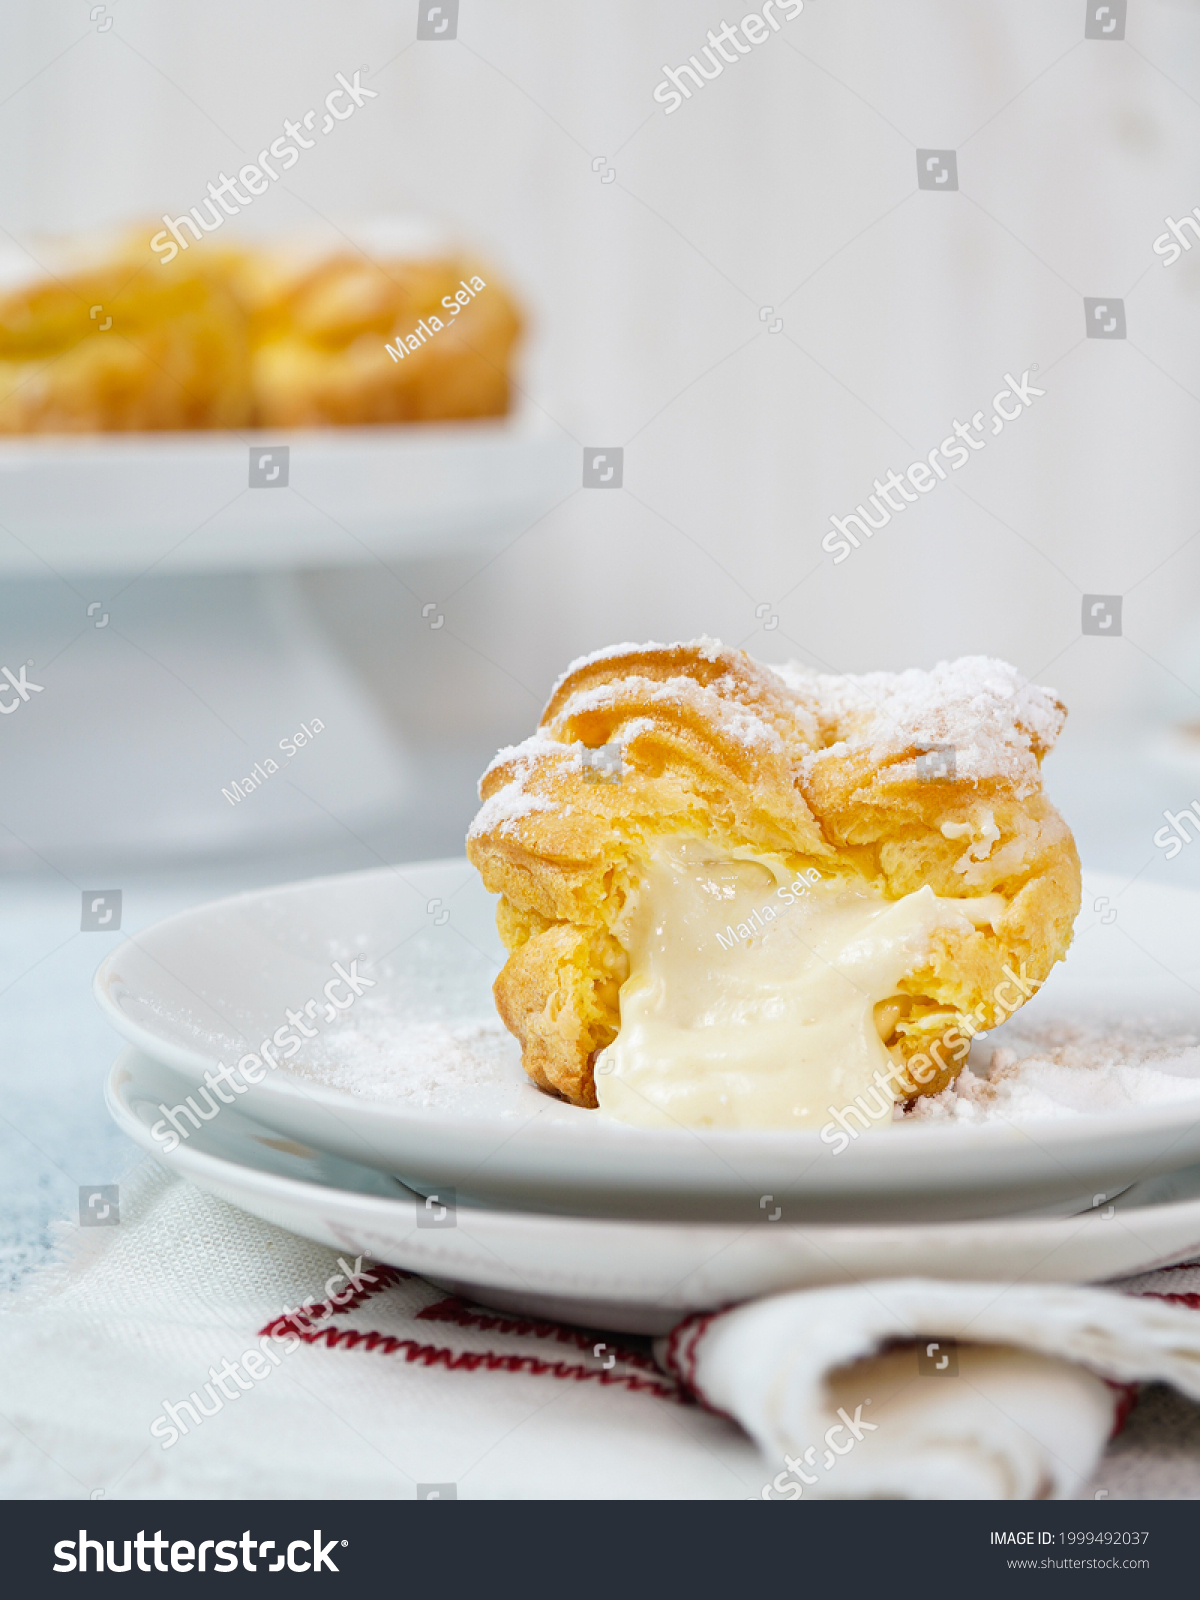 Melted cream,kue soes original,soes original or cream puffs or Choux Pastry Cream Puffs,pastry ball filled with whipped cream, crispy and airy choux pastry shells are filled with smooth and soft cream #1999492037